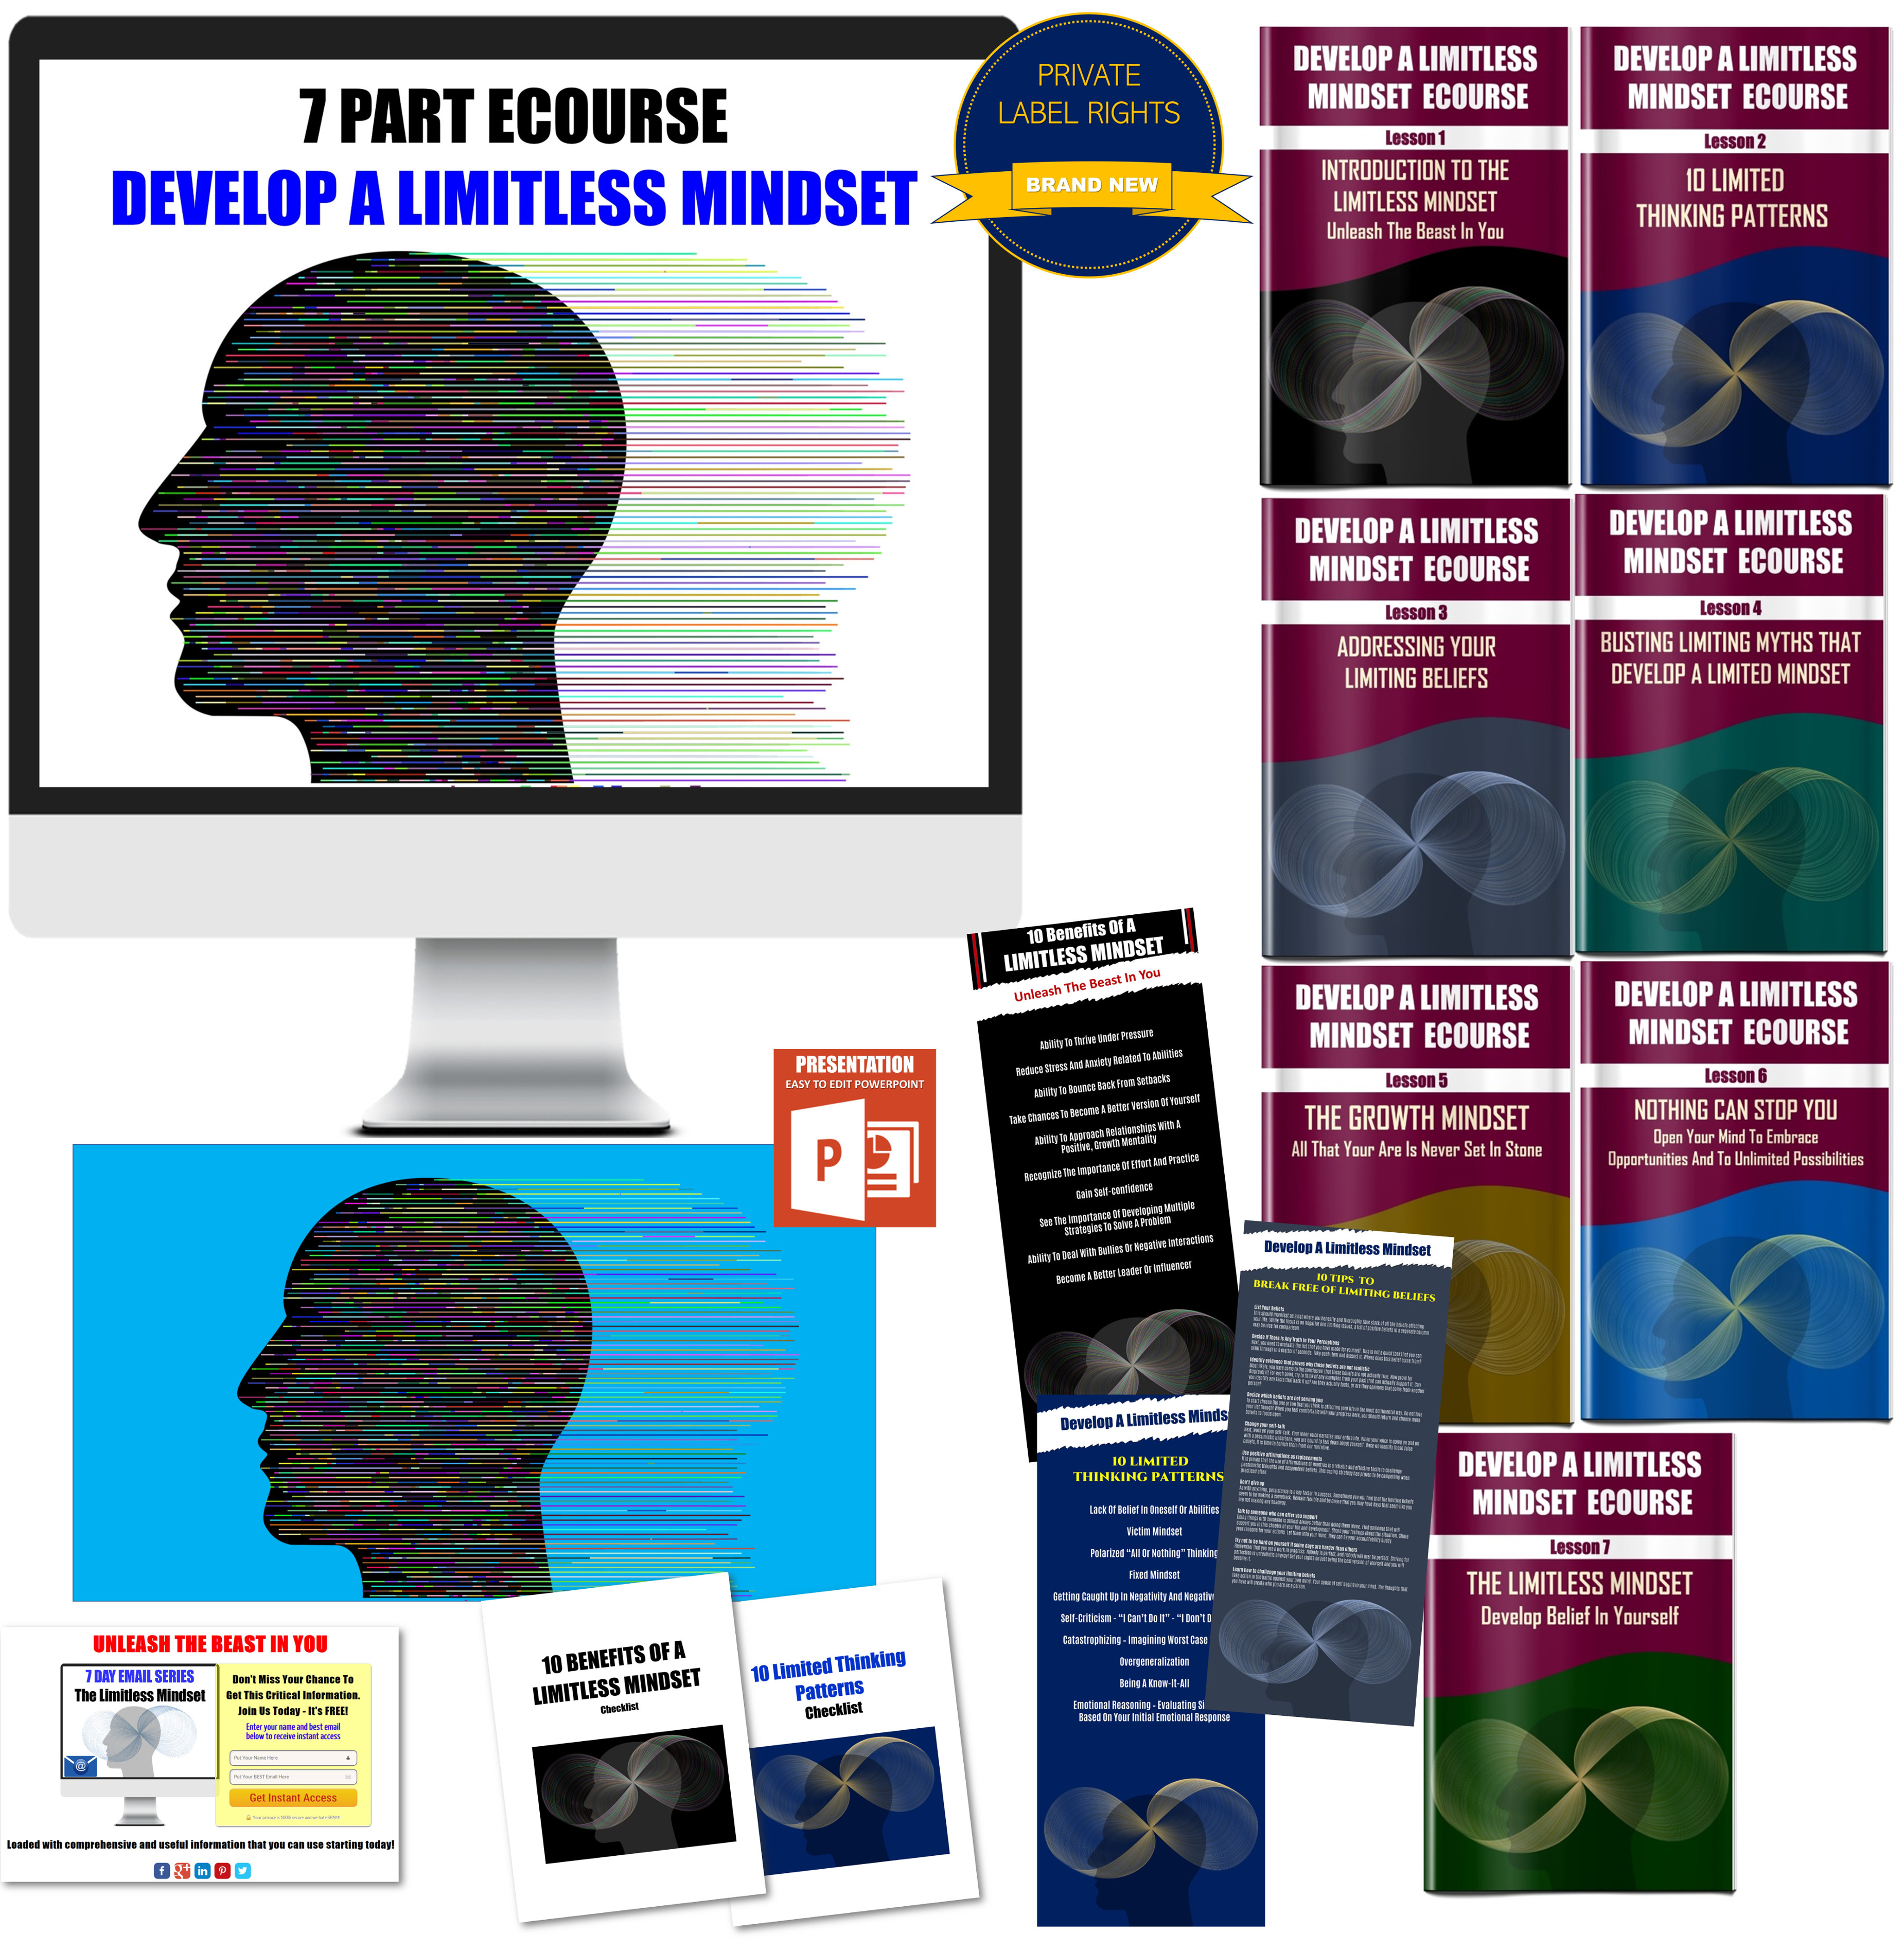 7 PART ECOURSE DEVELOP A LIMITLESS MINDSET - Private Label Rights